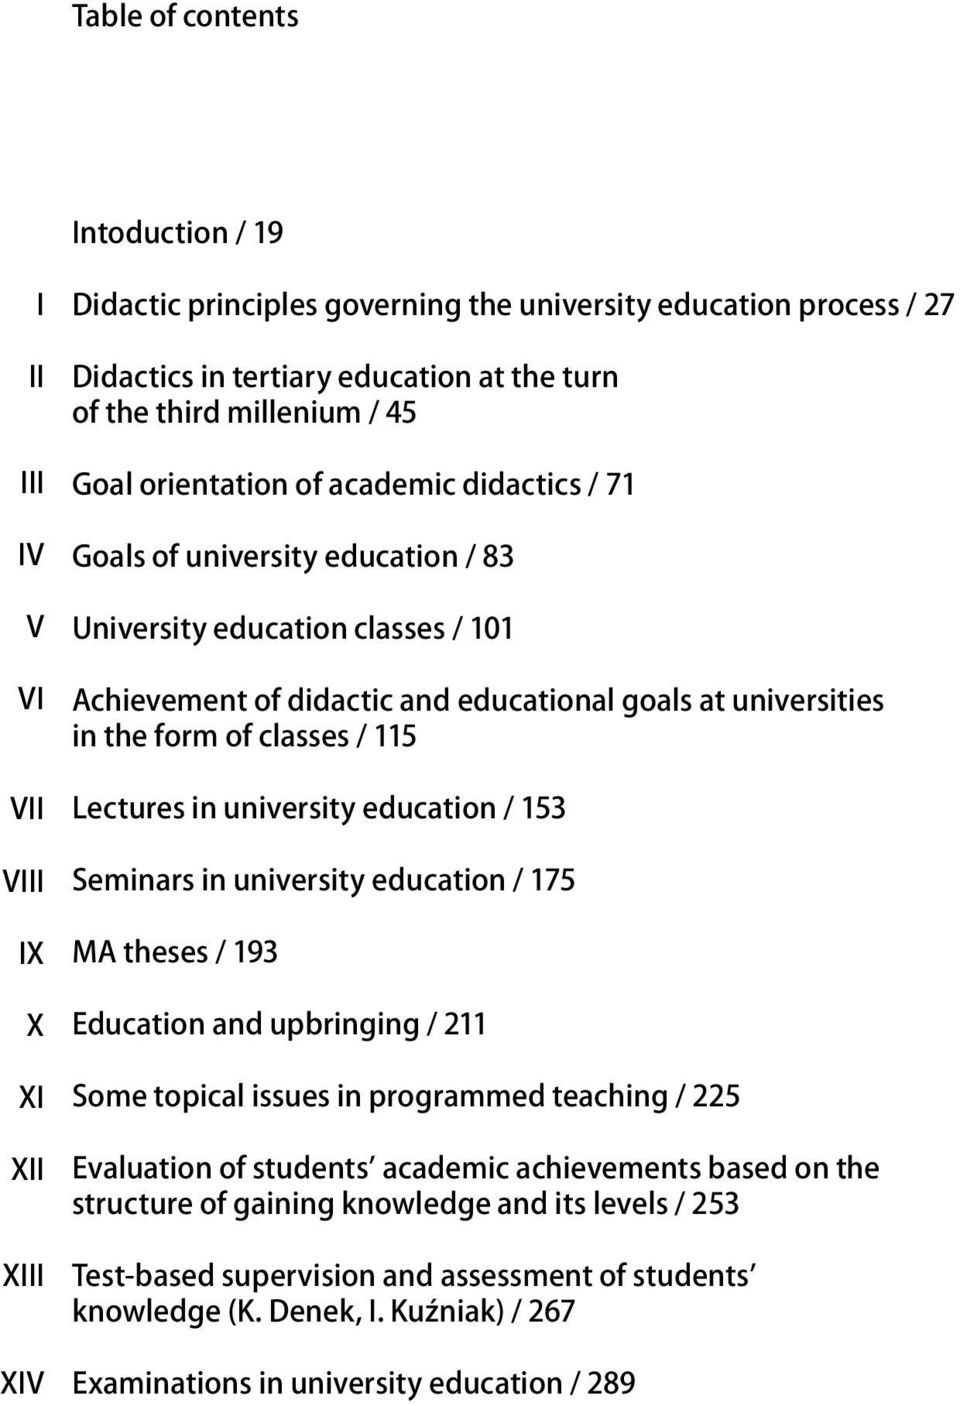 universities in the form of classes / 115 Lectures in university education / 153 Seminars in university education / 175 MA theses / 193 Education and upbringing / 211 Some topical issues in